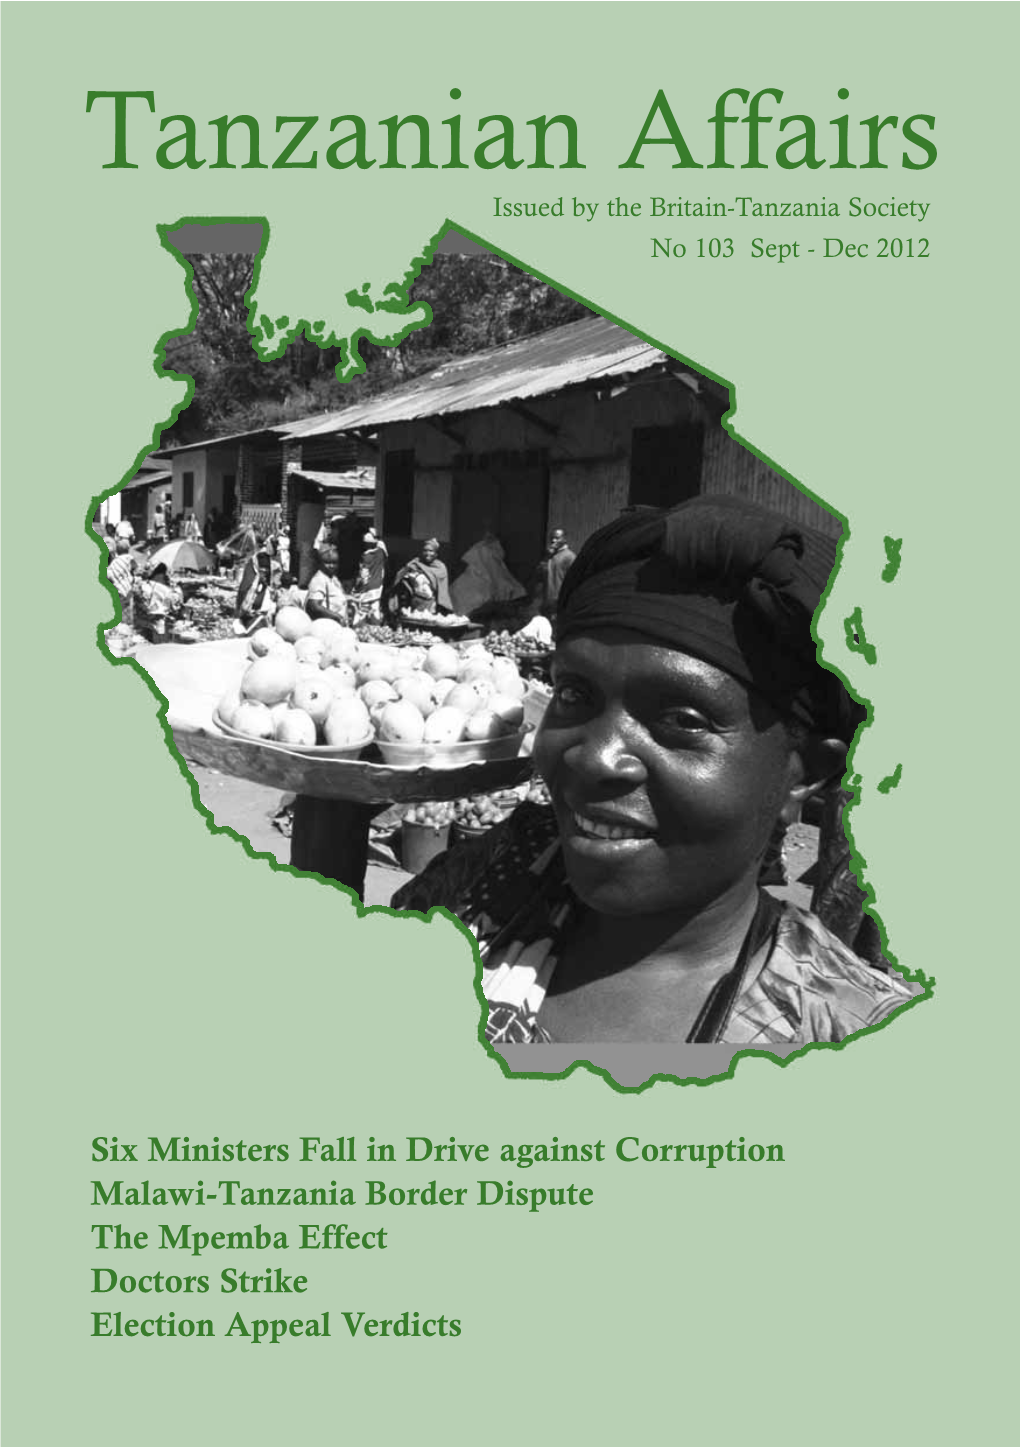 Issued by the Britain-Tanzania Society No 103 Sept - Dec 2012